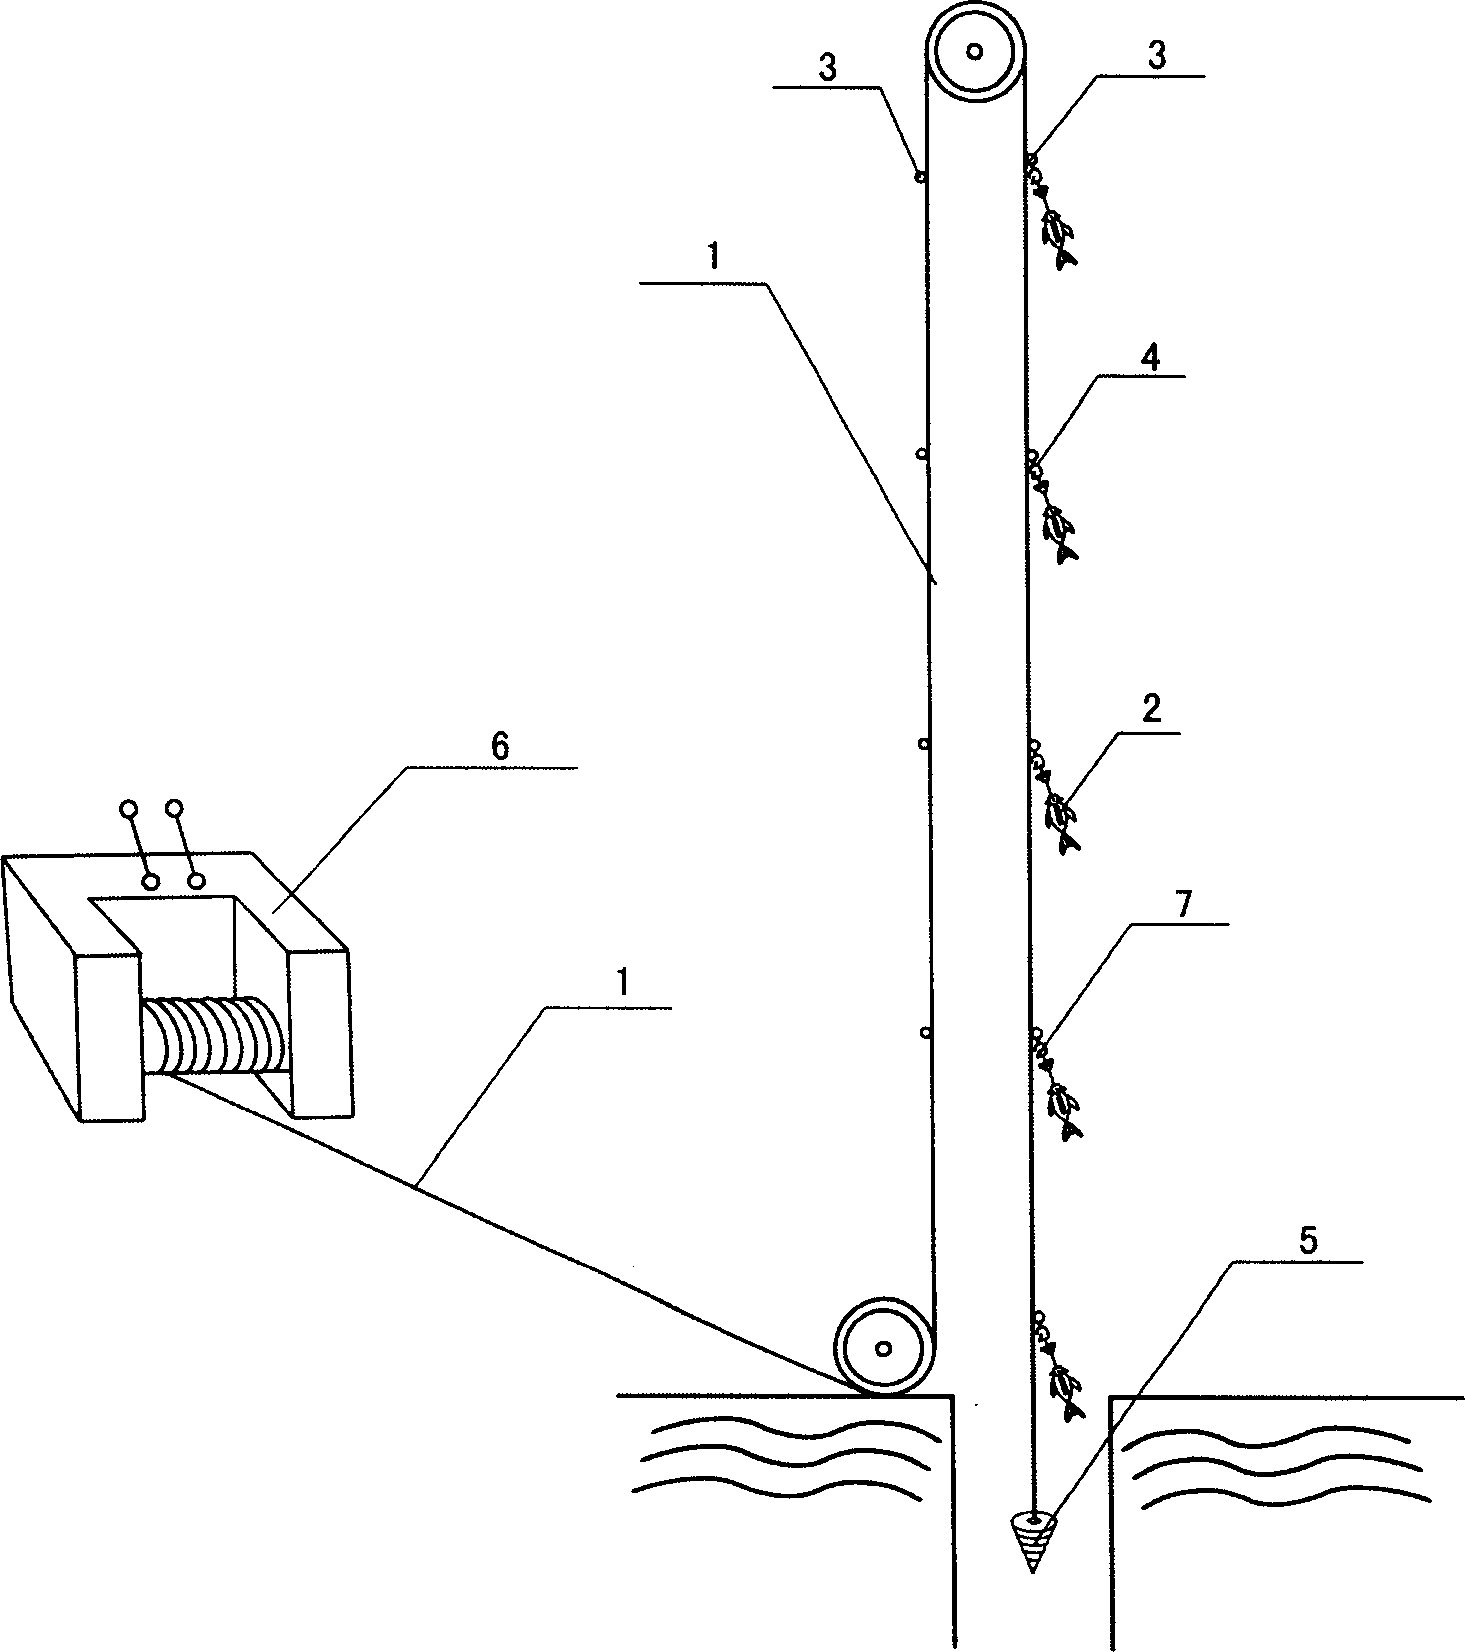 Device for detecting temp in downhole